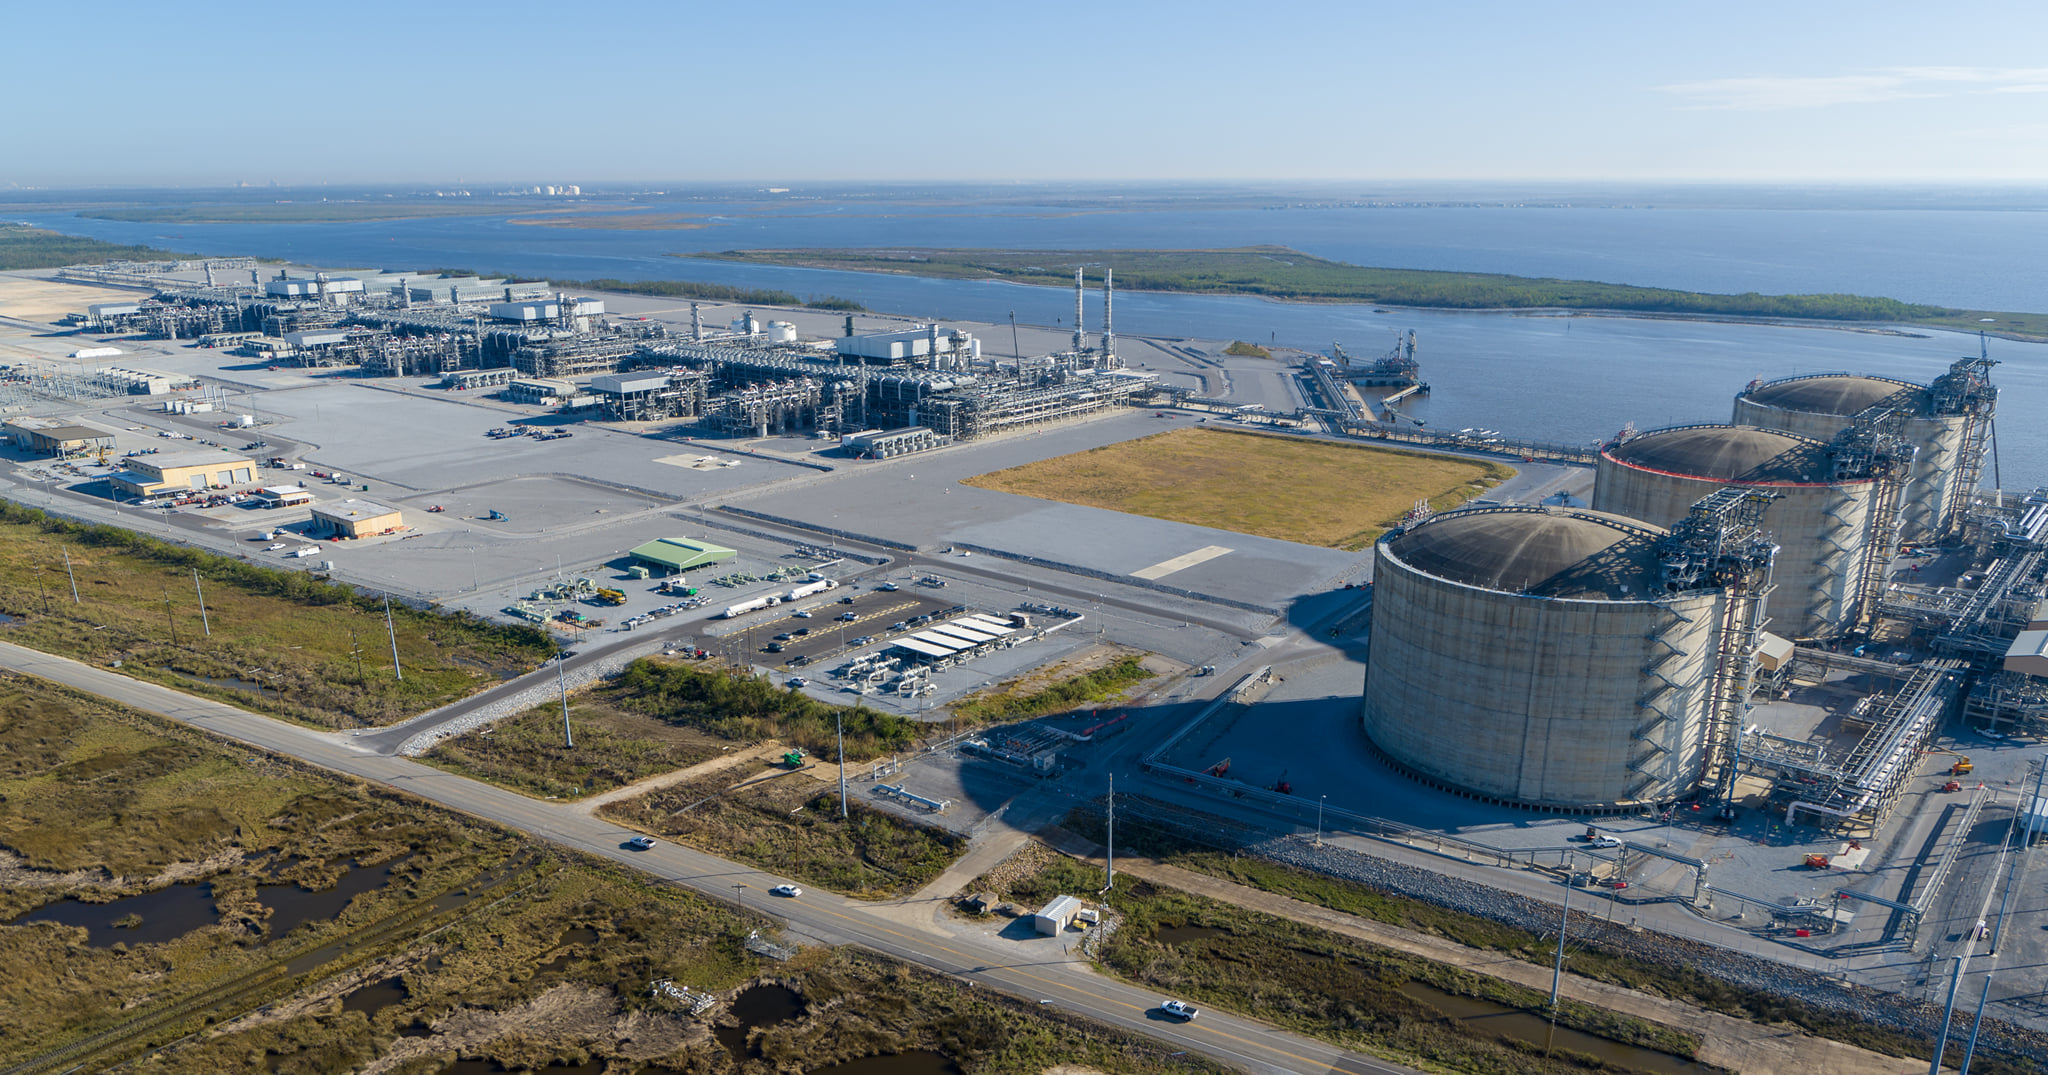 Sempra remains 'quite bullish' on Cameron LNG expansion, says CEO